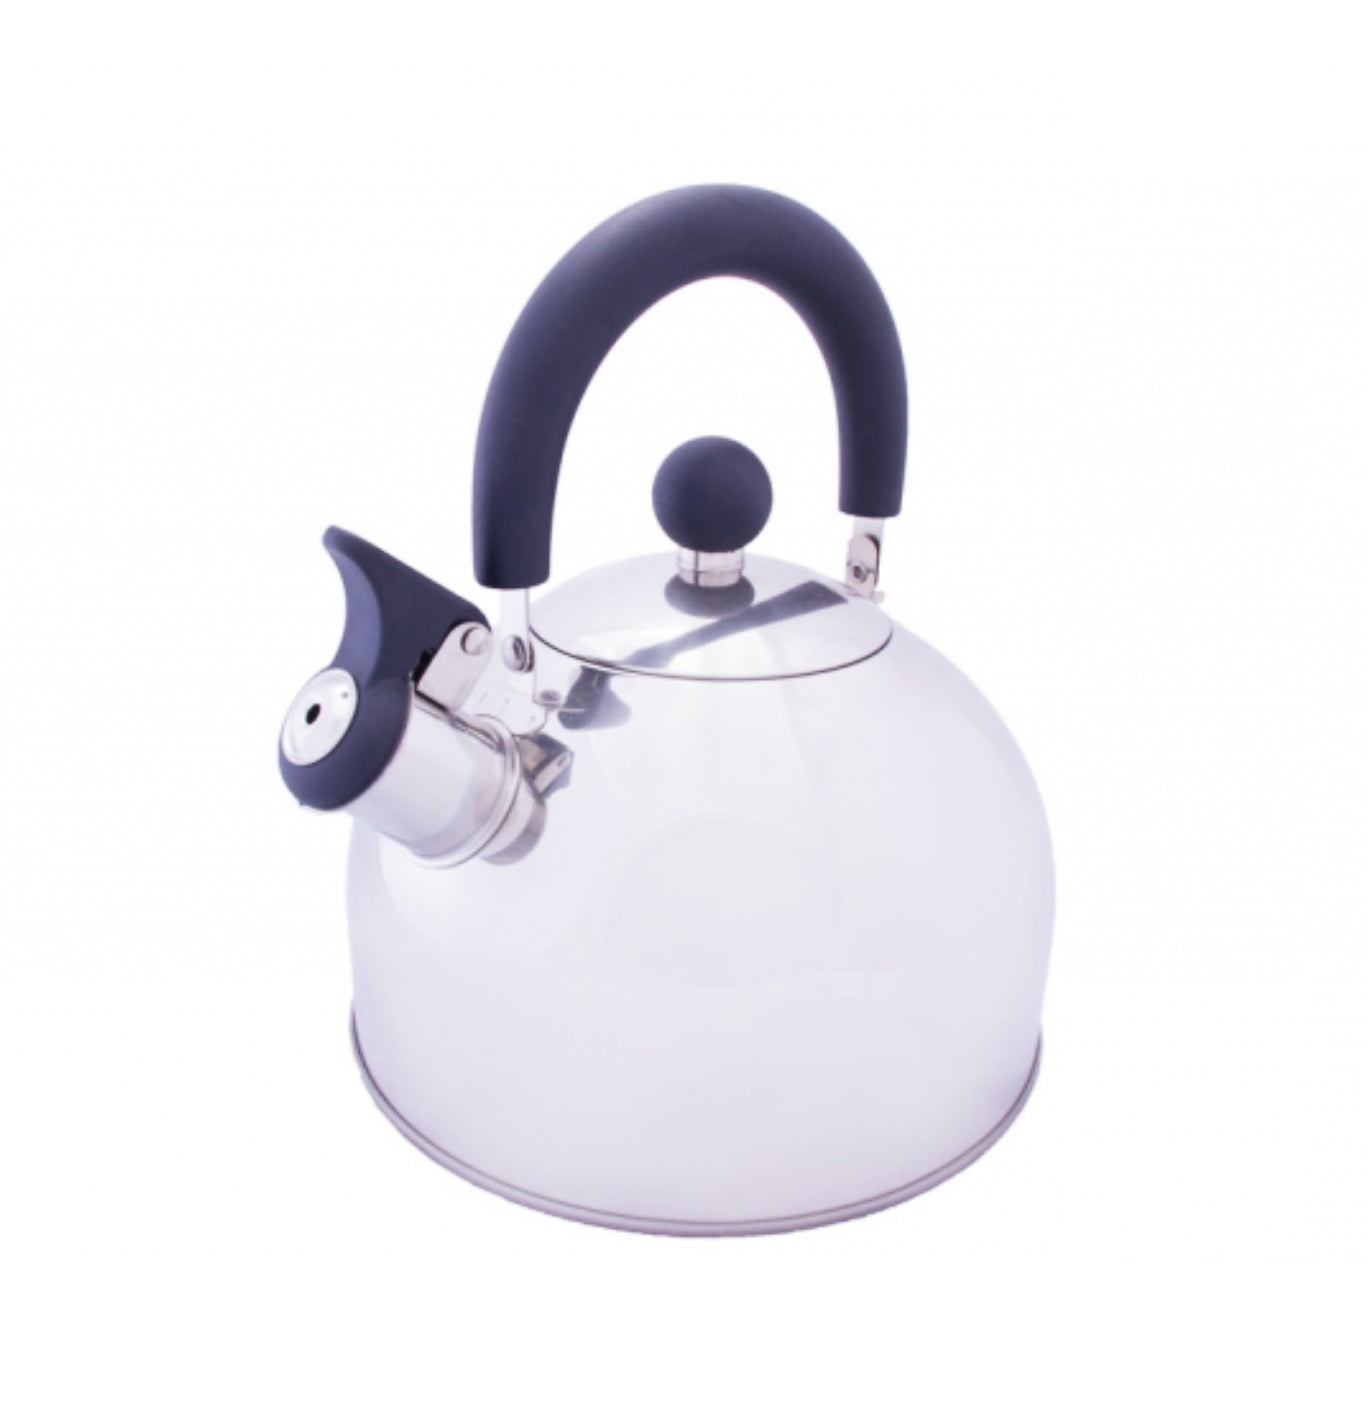 Vango Stainless Steel Gas Kettle | 2.0 Litre Image